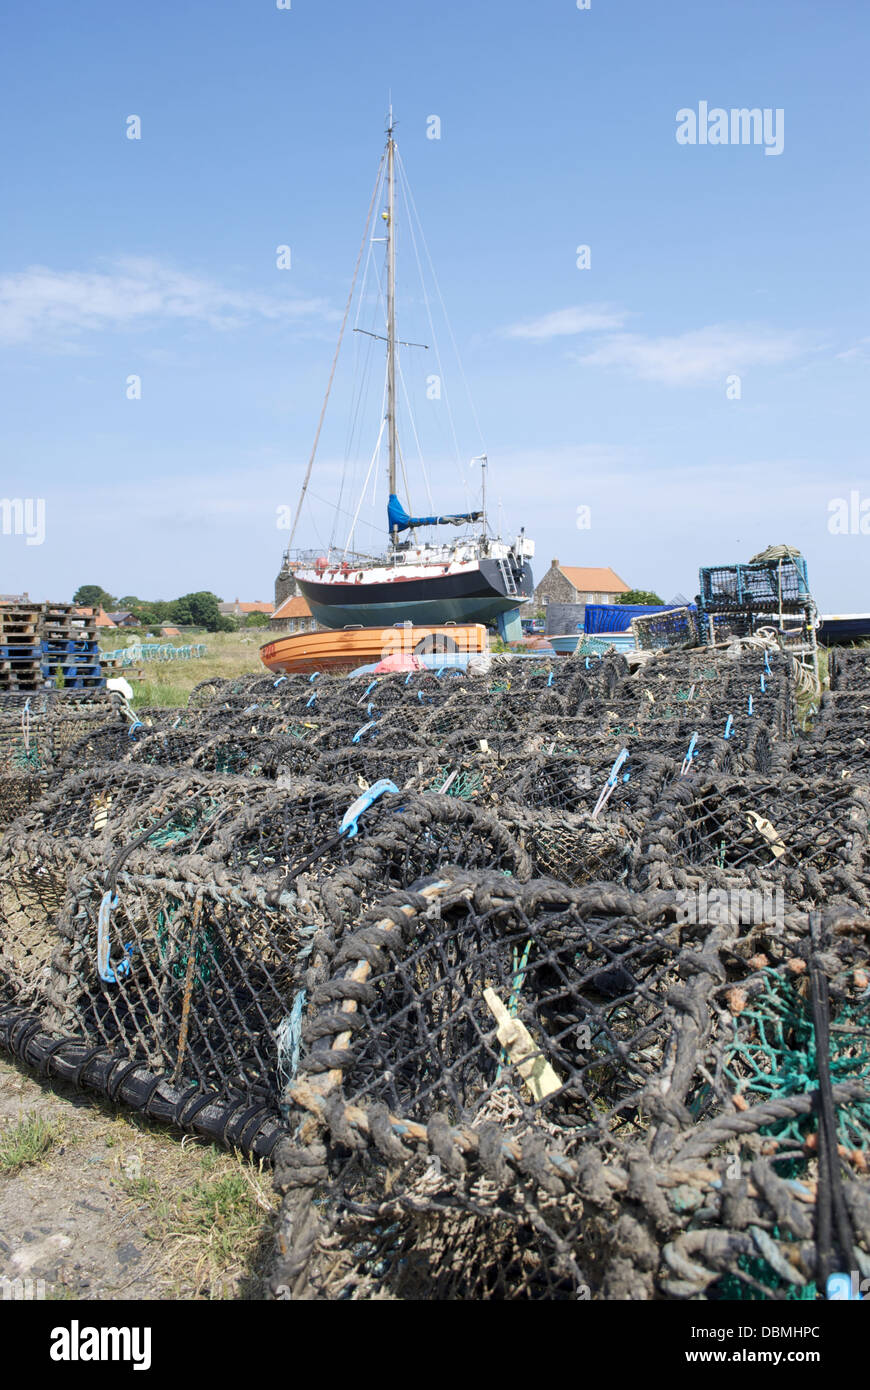 Lobster traps on holy island Stock Photo